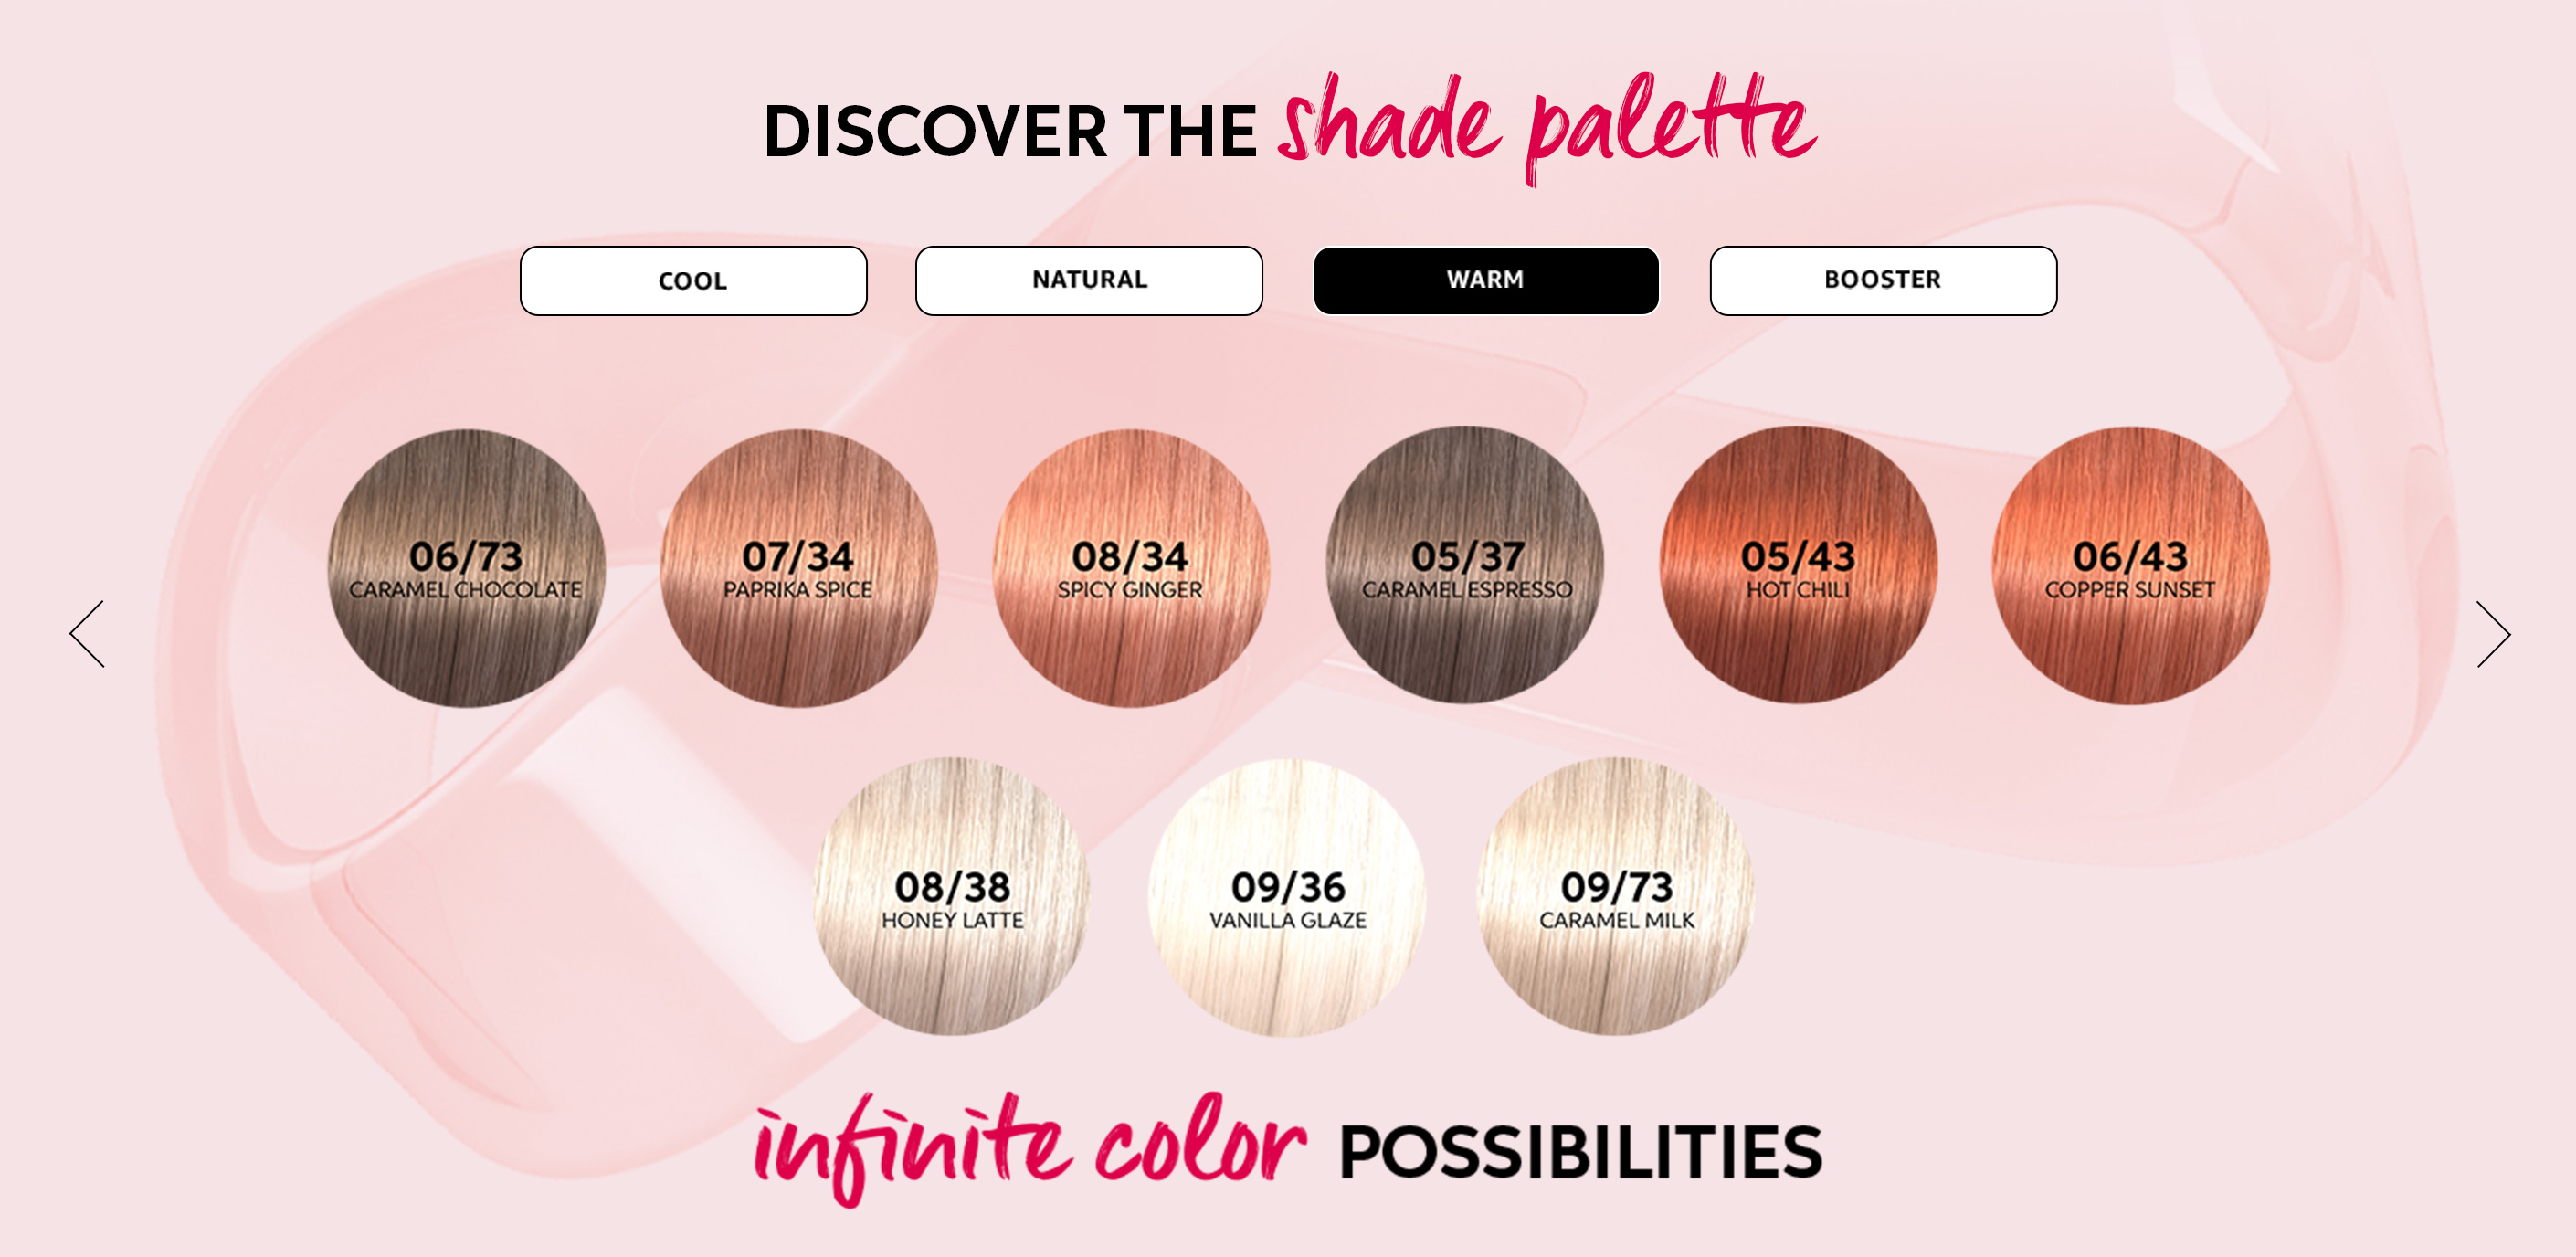 Swatches of the Warm tones from the Wella Shinefinity Glaze shade palette.